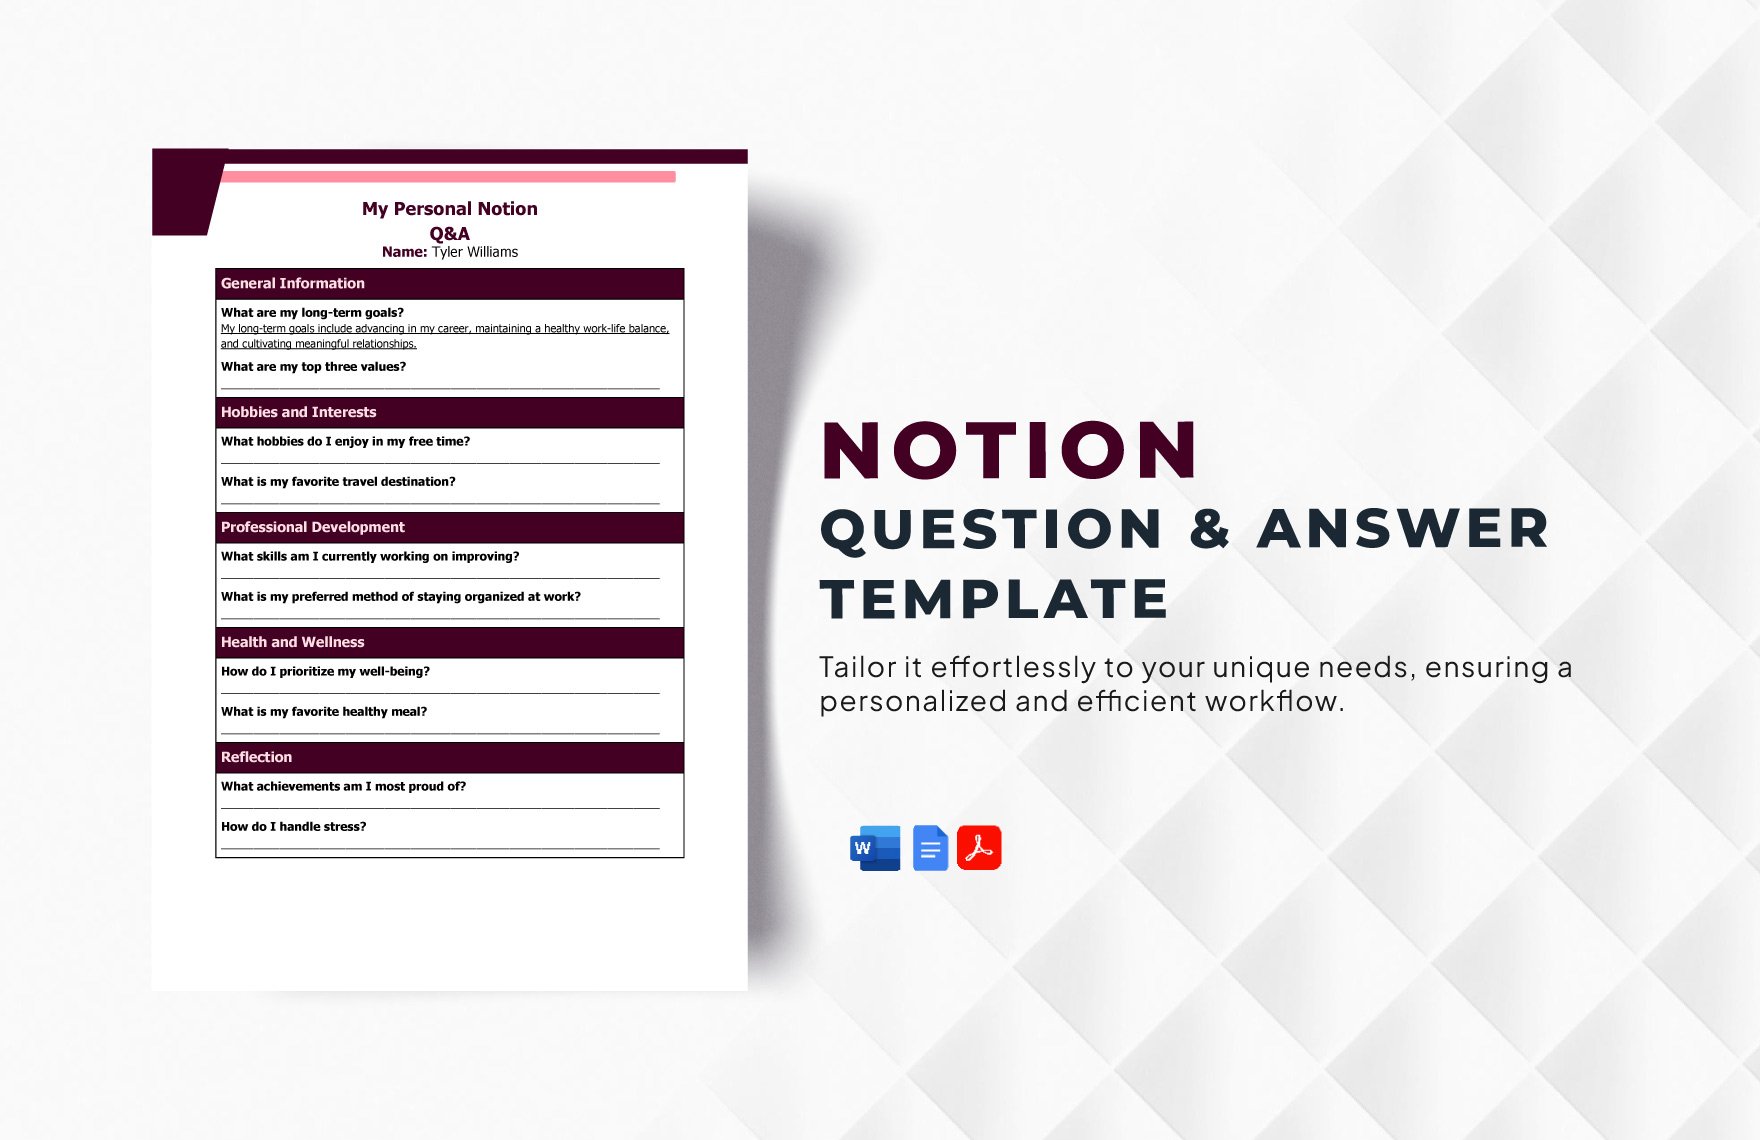 Notion Question & Answer Template